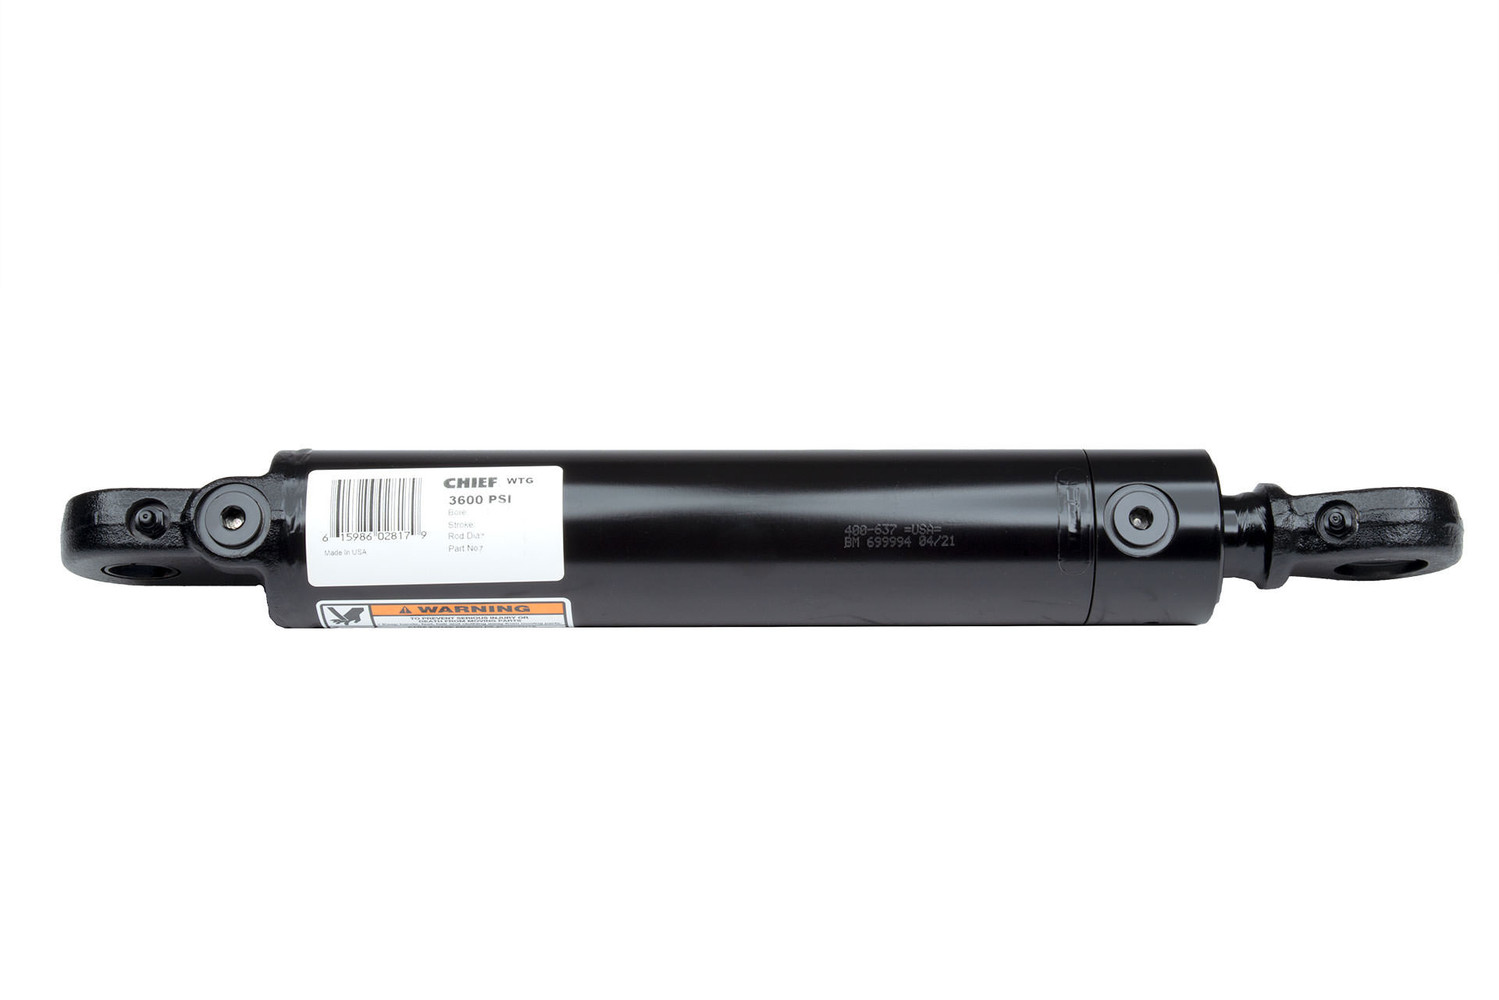 CHIEF WTG WELDED TANG HYDRAULIC CYLINDER: 2.5 BORE X 10 STROKE - 1.375 ROD